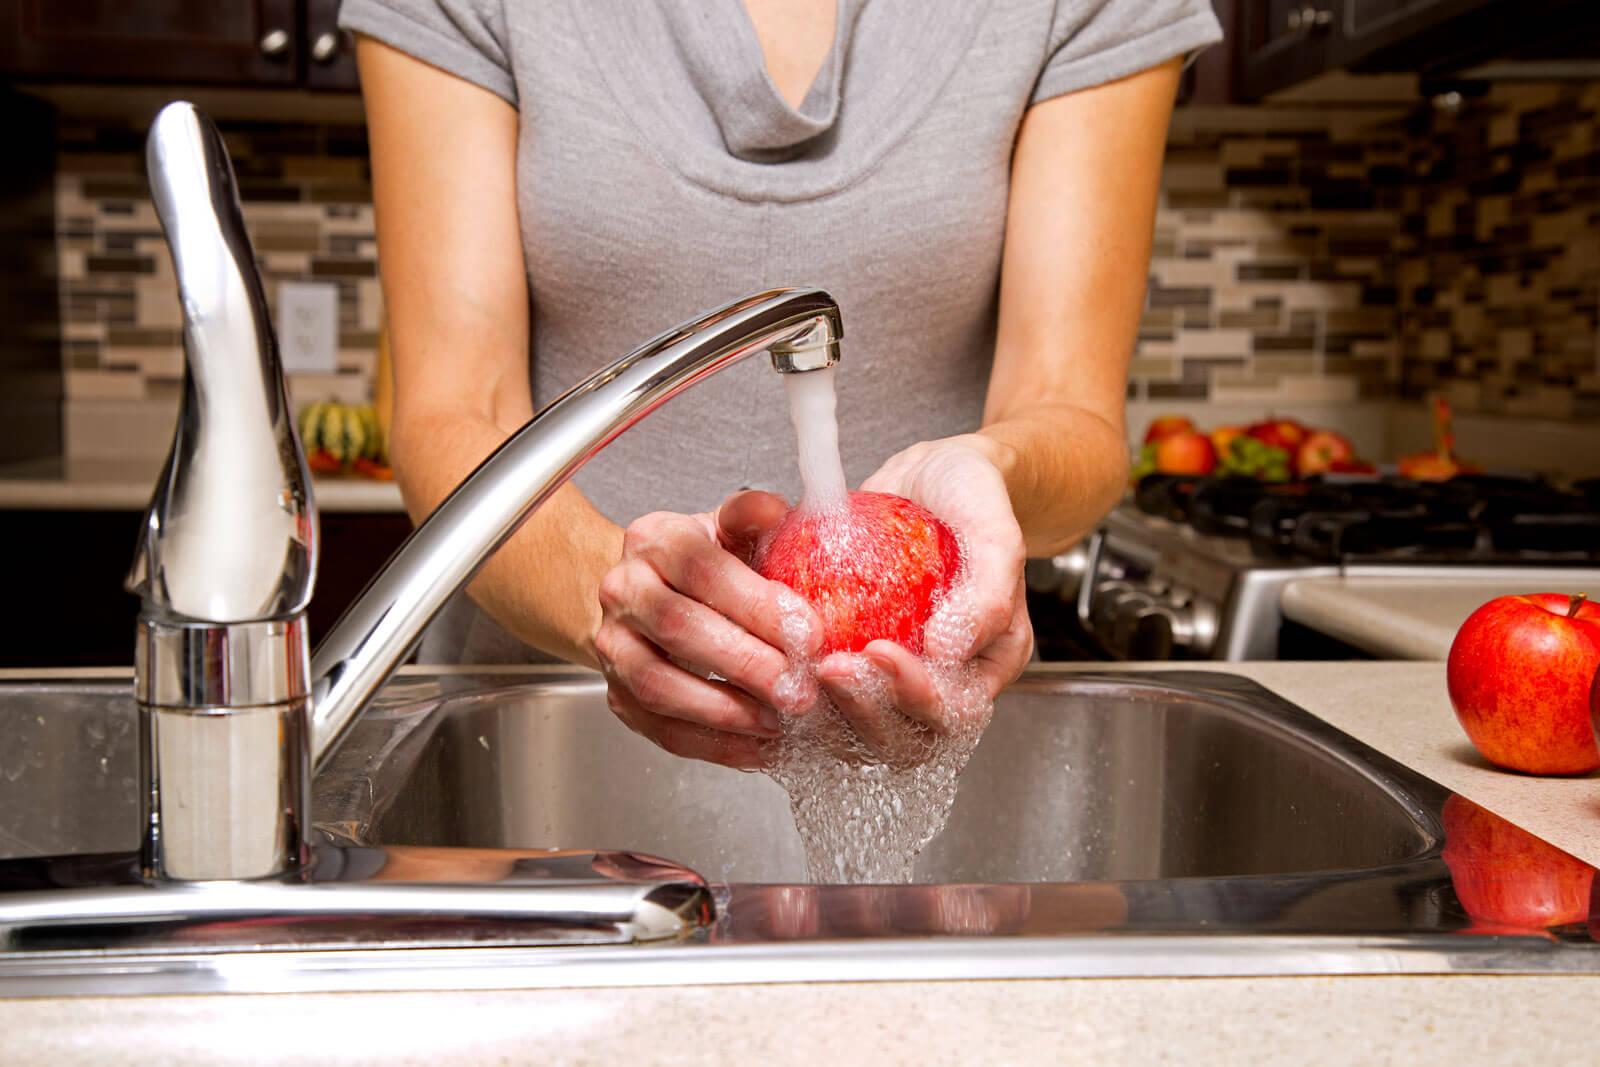 Washing an apple in the sink